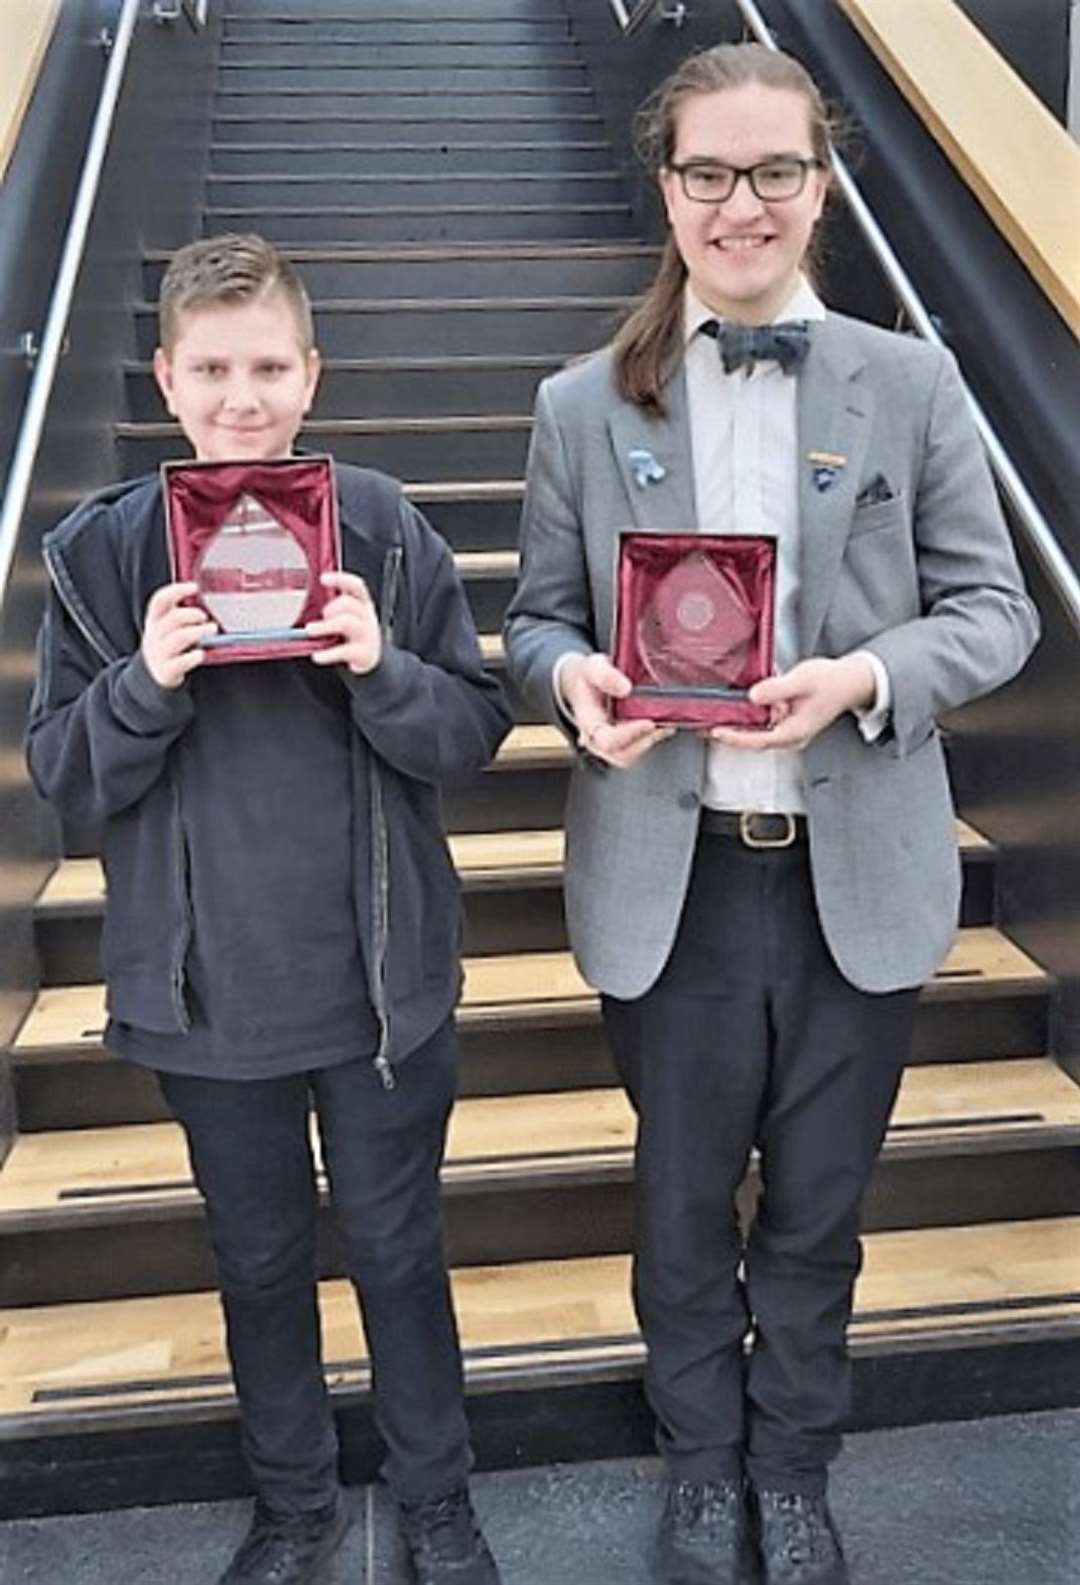 Daniel Gunn, left, and Dylan Cundall with their awards.